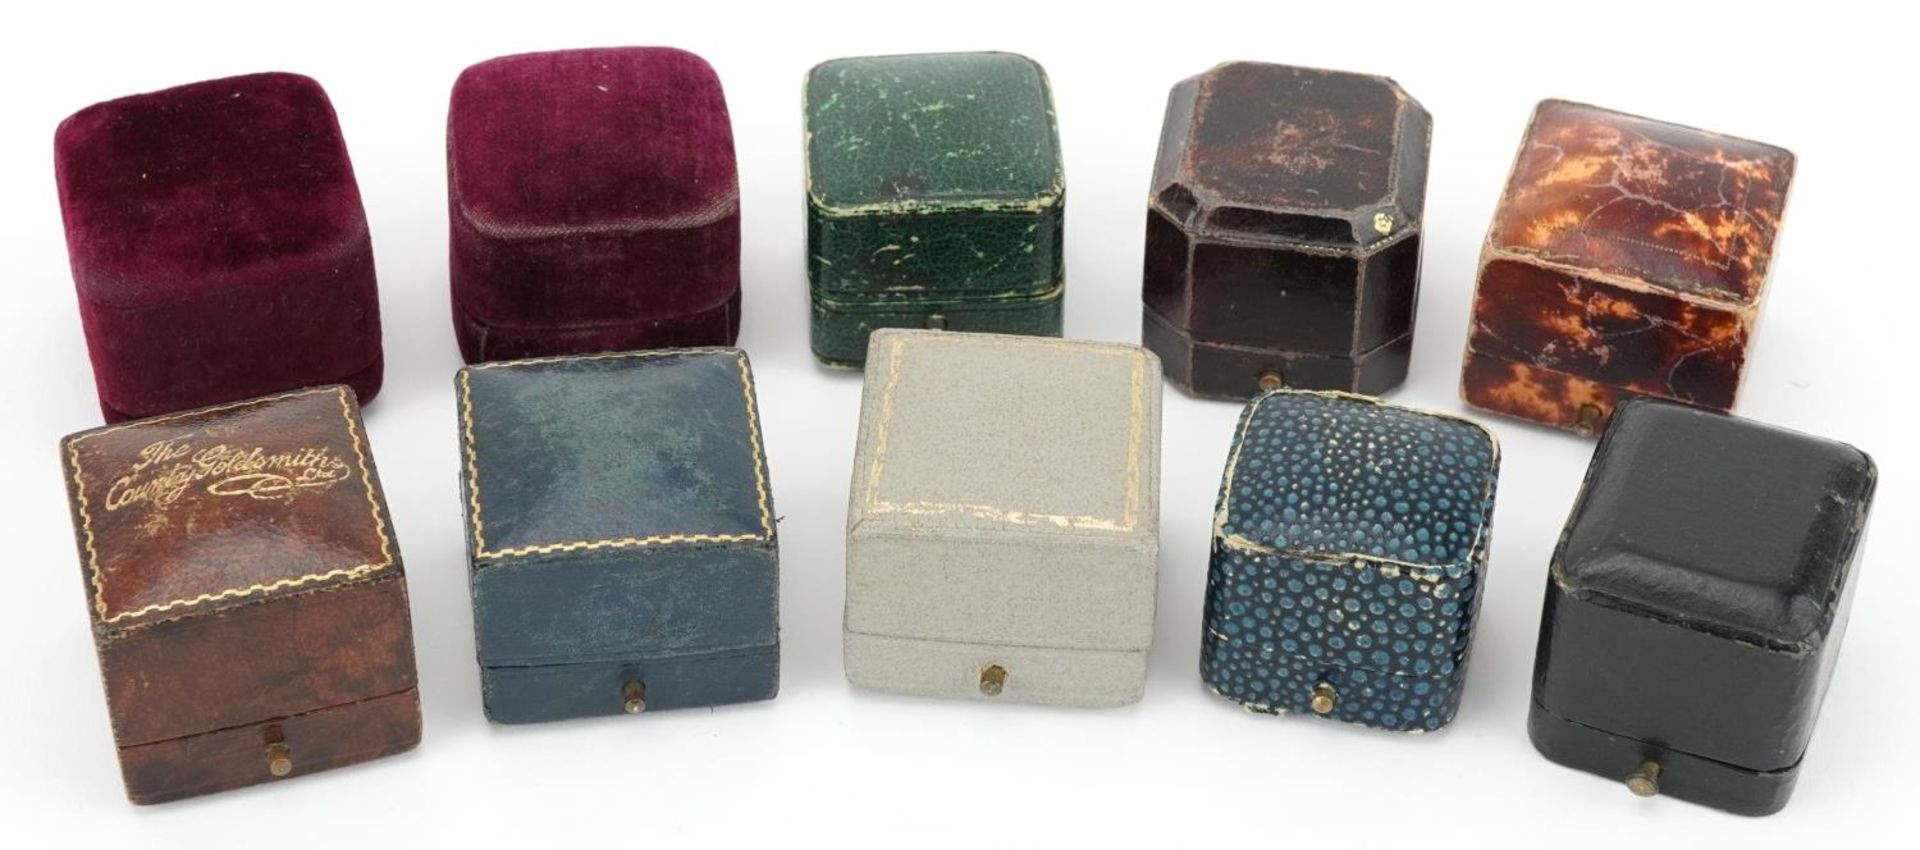 Ten 19th century and later jeweller's ring boxes with velvet and silk lined interiors including F